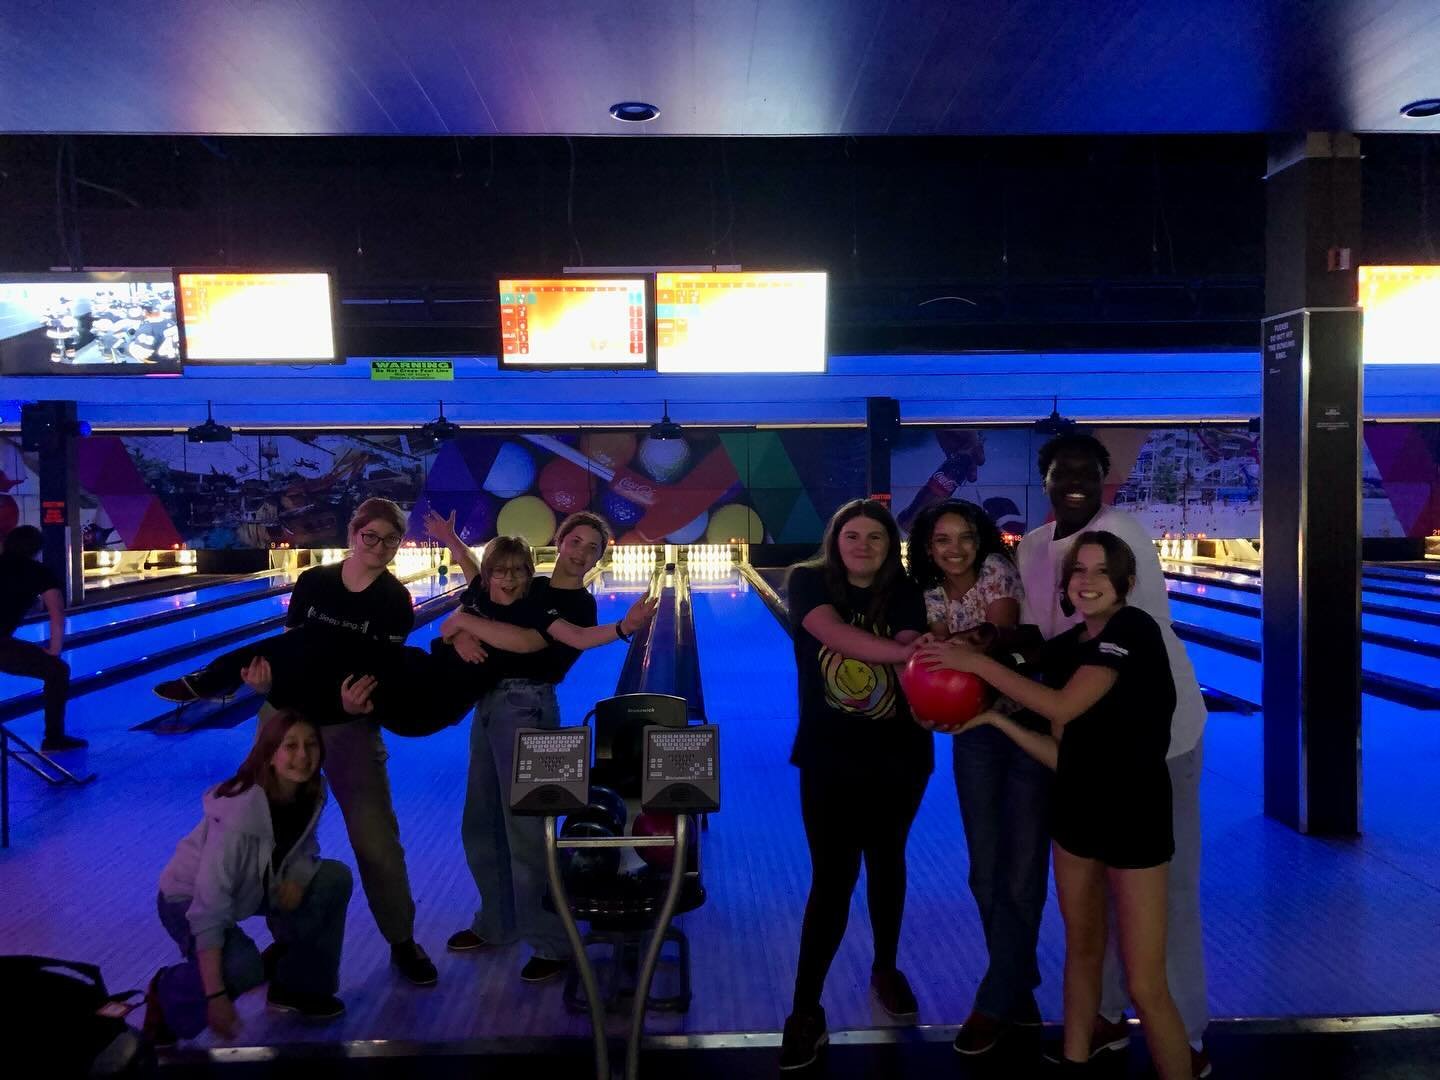 A bowling celebration after a weekend of singing! 🎶🎳

We had the BEST TIME with our friends from @occ_sings @occ_tours - and can&rsquo;t wait to go visit them in Ottawa at the end of June!

Thank you to Experiences Canada for helping facilitate thi